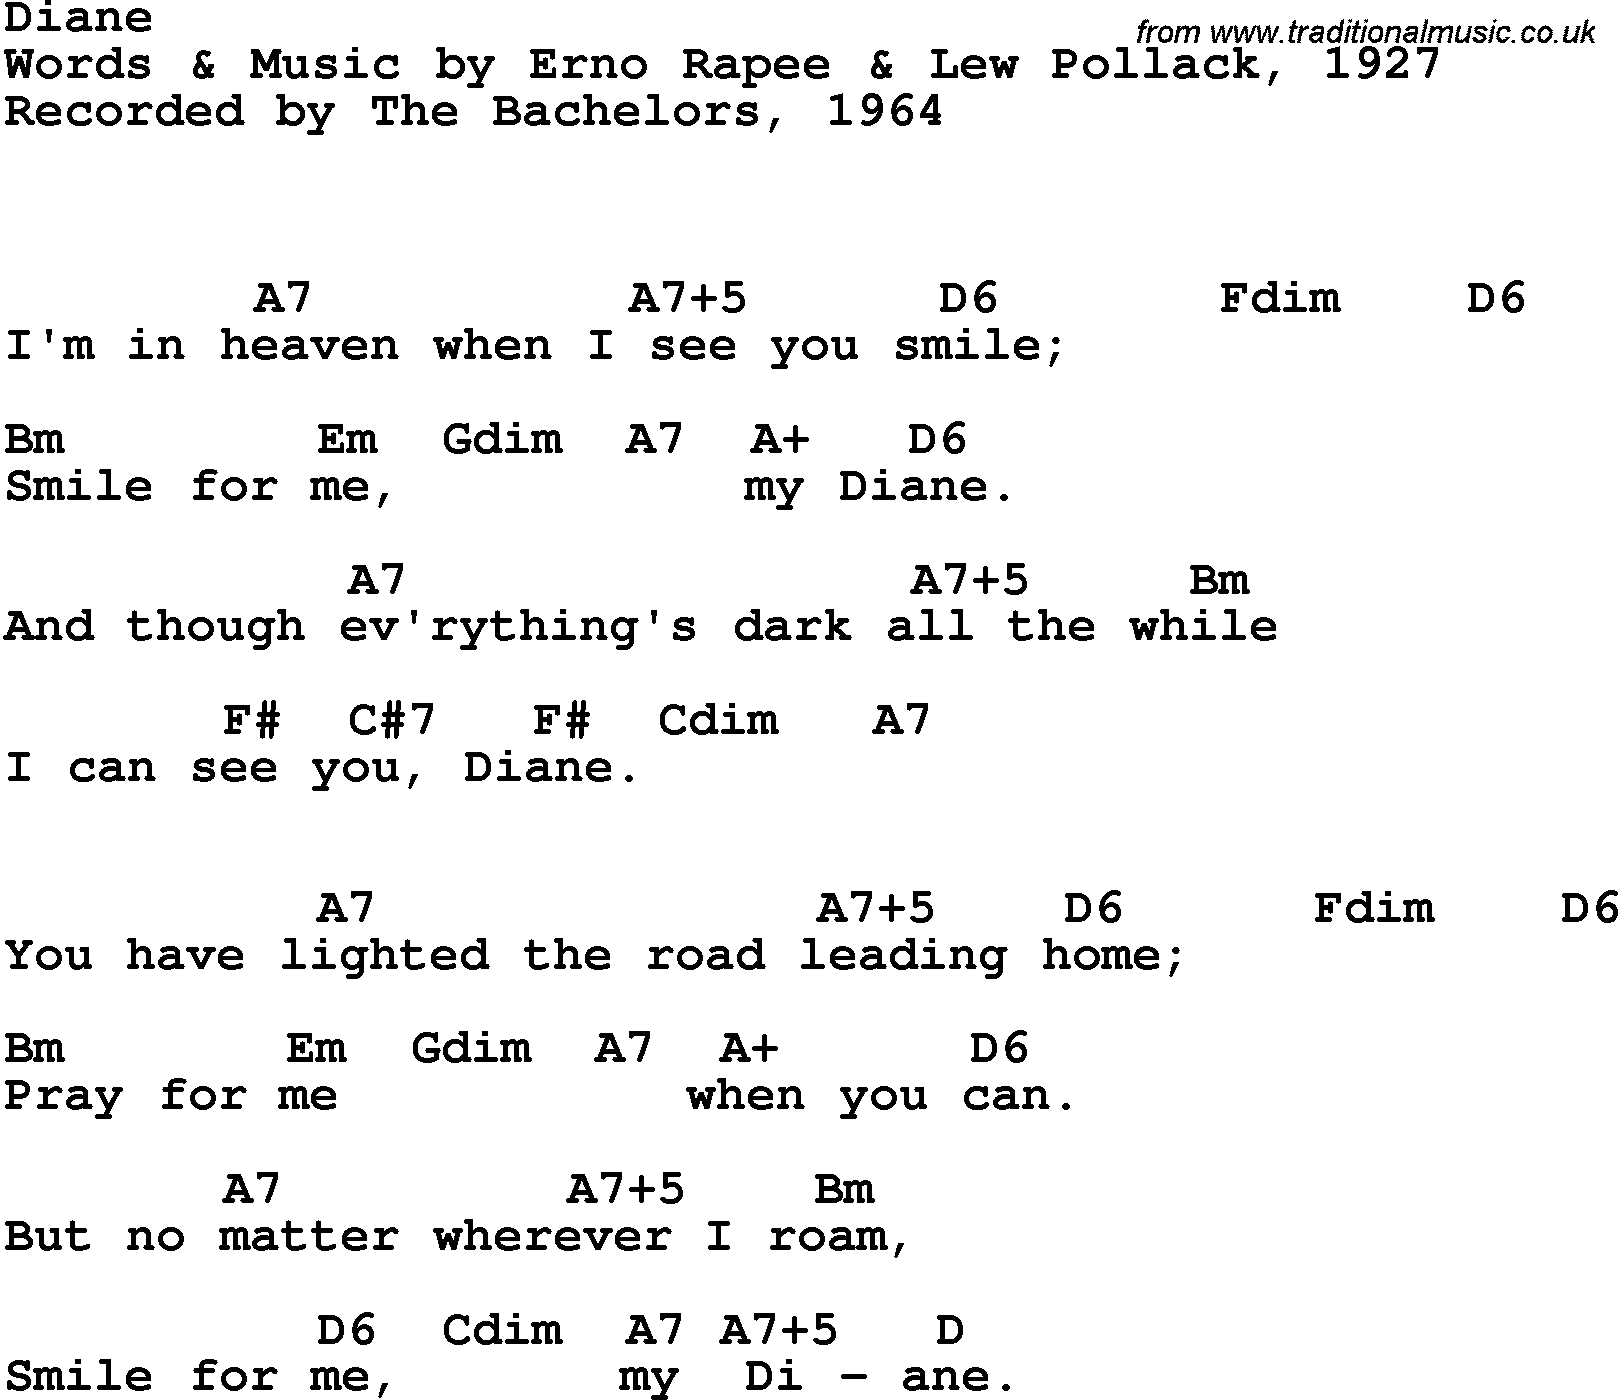 Song Lyrics with guitar chords for Diane - Bachelors, The, 1964